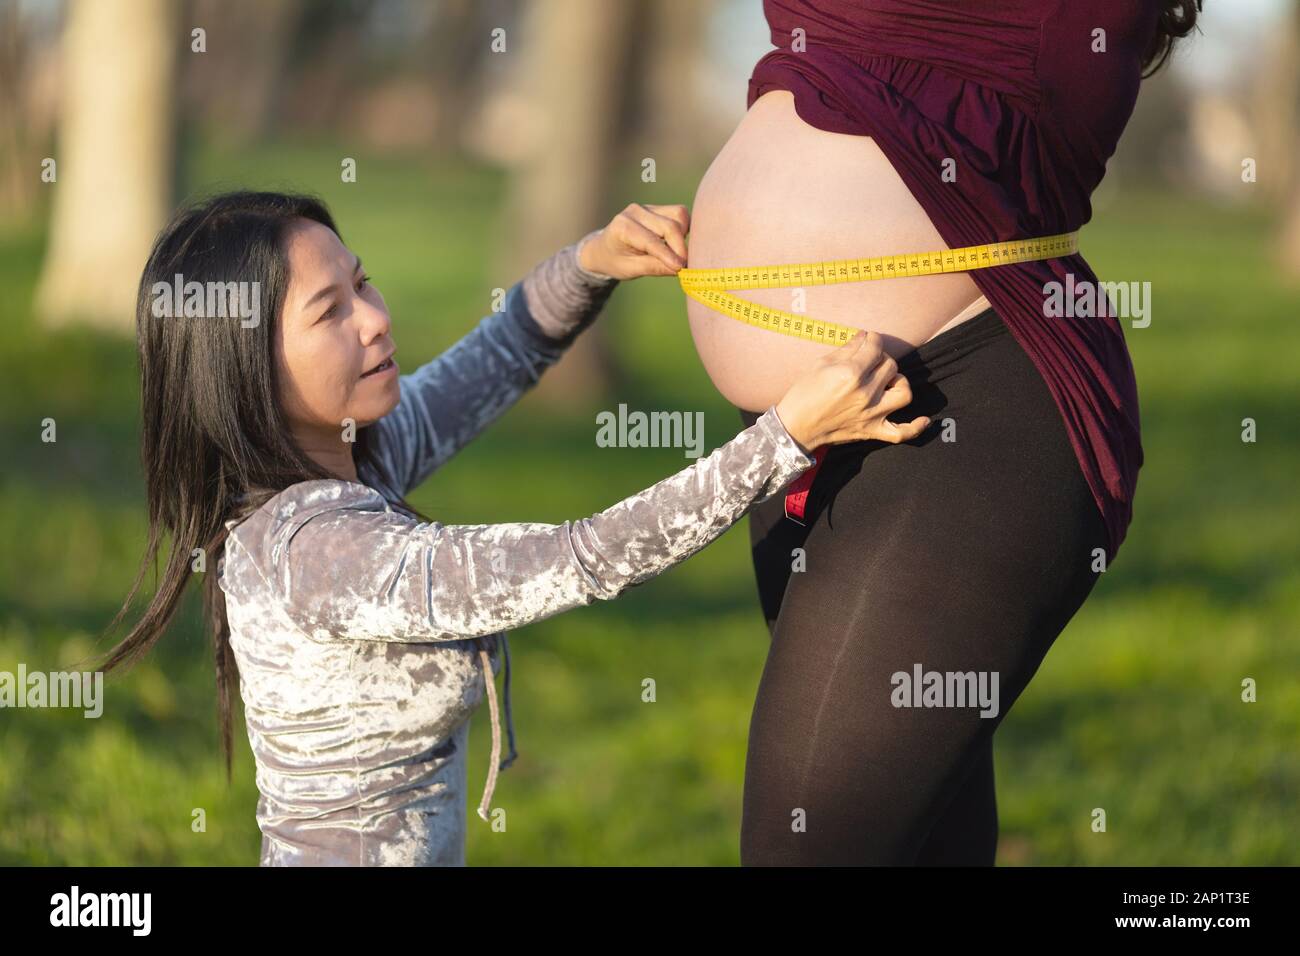 Asian Woman Measuring Pregnant Womans Bare Belly With A Tape Outdoors